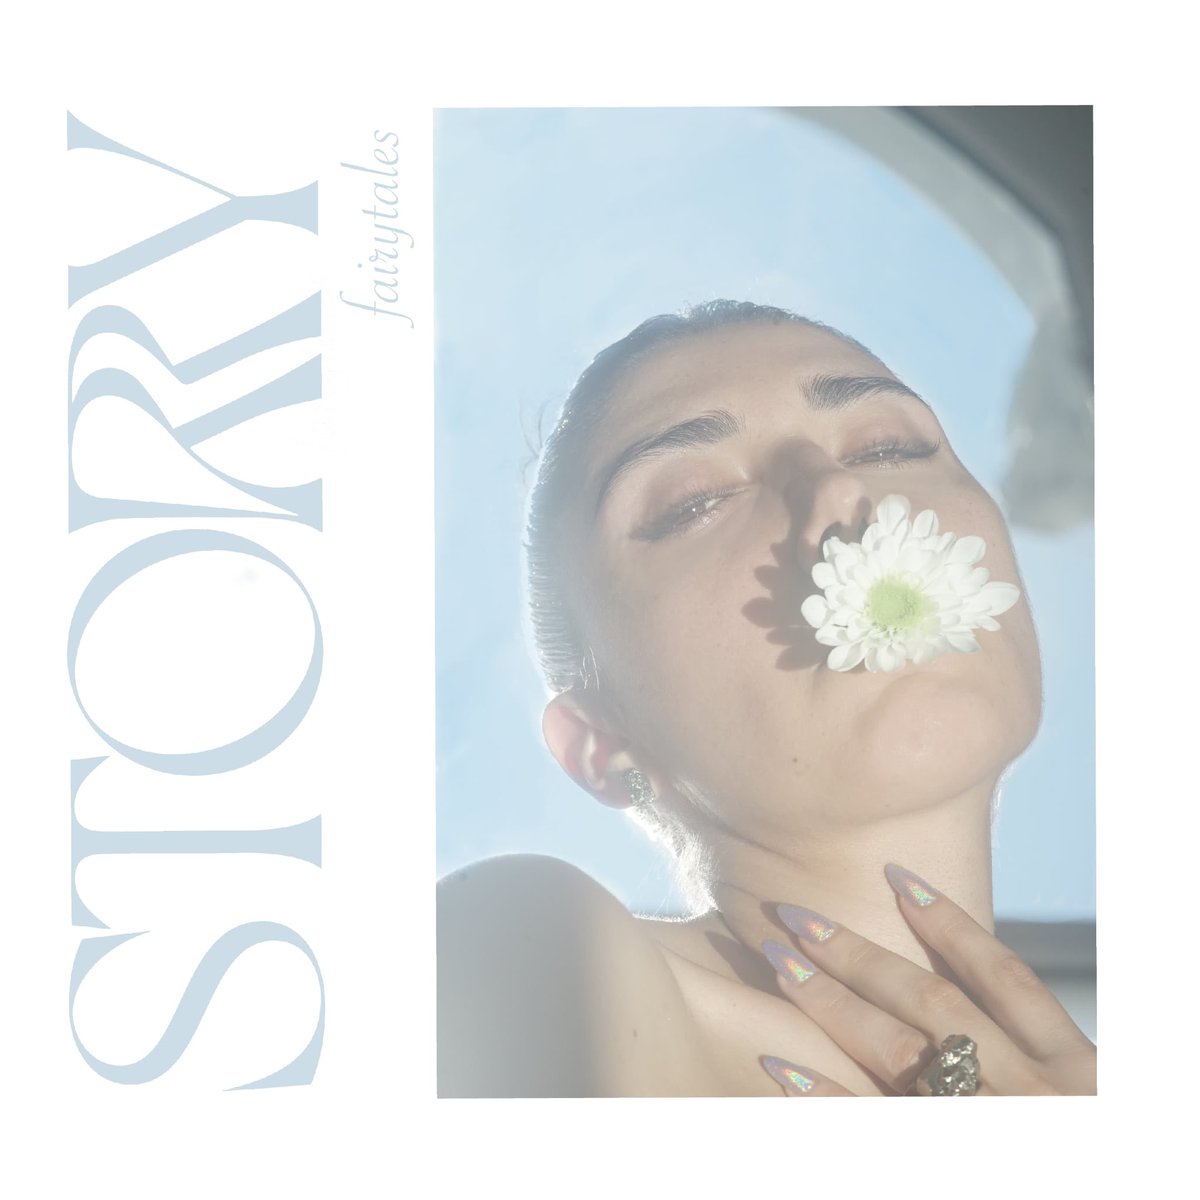 If you do anything today, make sure it’s listening to @storrymusic’s surprise track ‘fairytales’ - we reckon you’ll love it as much as we do! 😍🔥 Listen here: open.spotify.com/track/2X1BrCQp…